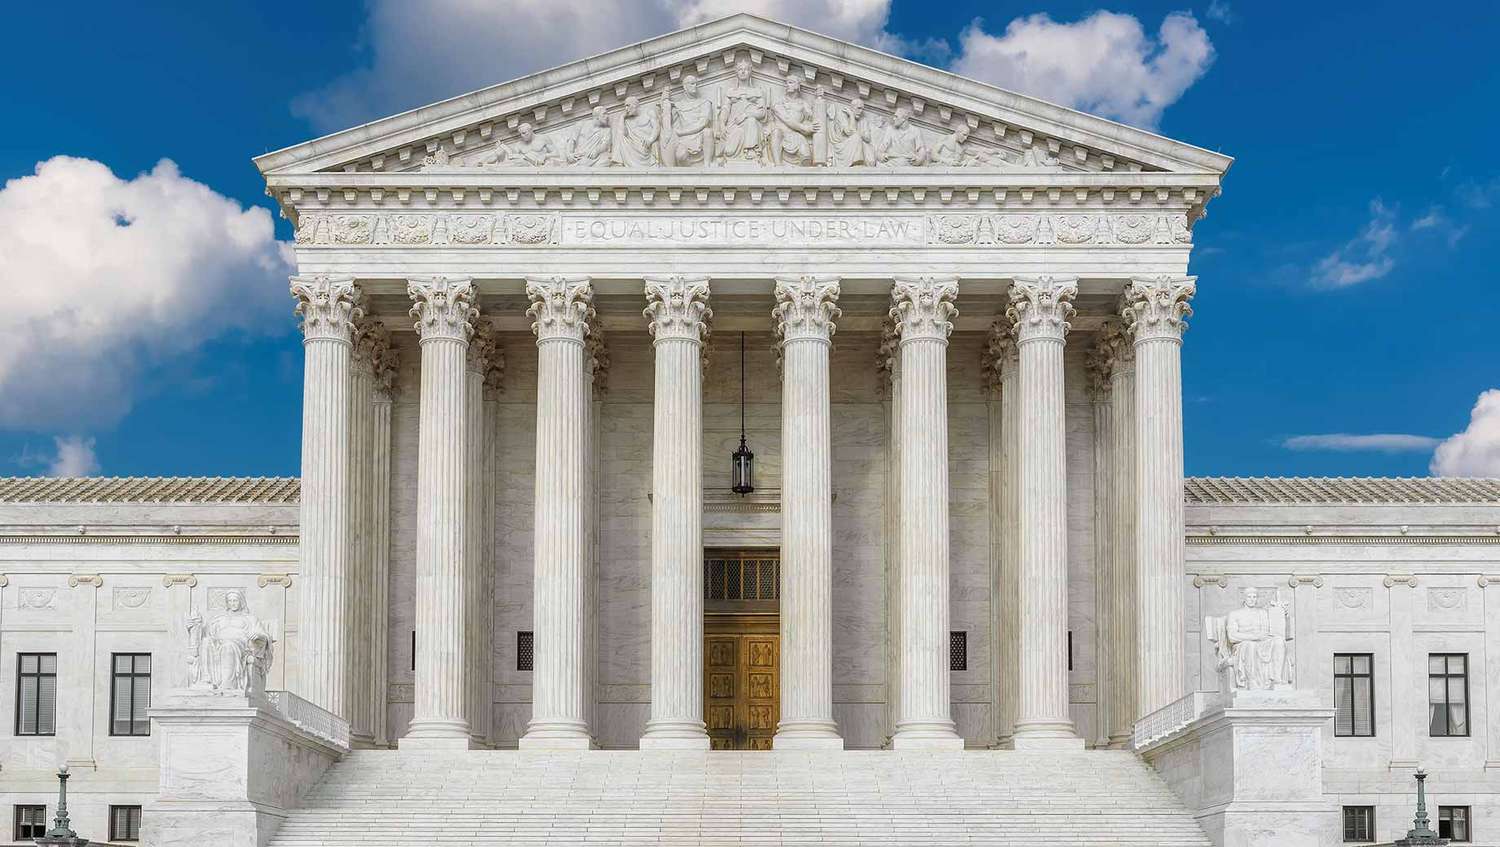 The U.S. Supreme Court's composition has changed multiple times, reflecting the nation's growth and political shifts.